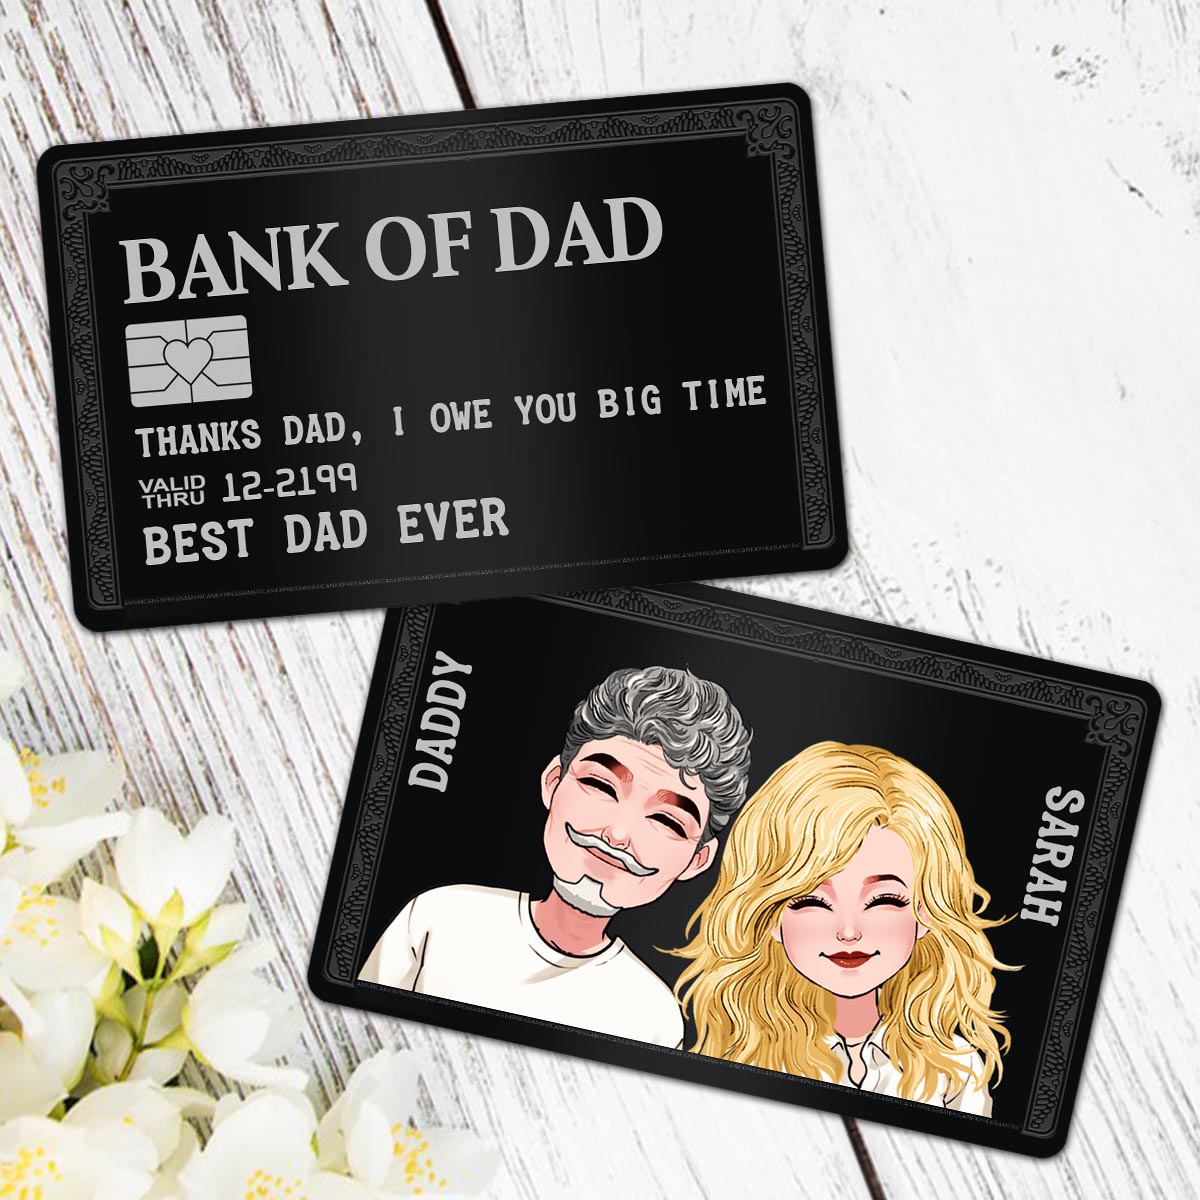 Bank Of Dad - Personalized Father's Day Father Wallet Insert Card